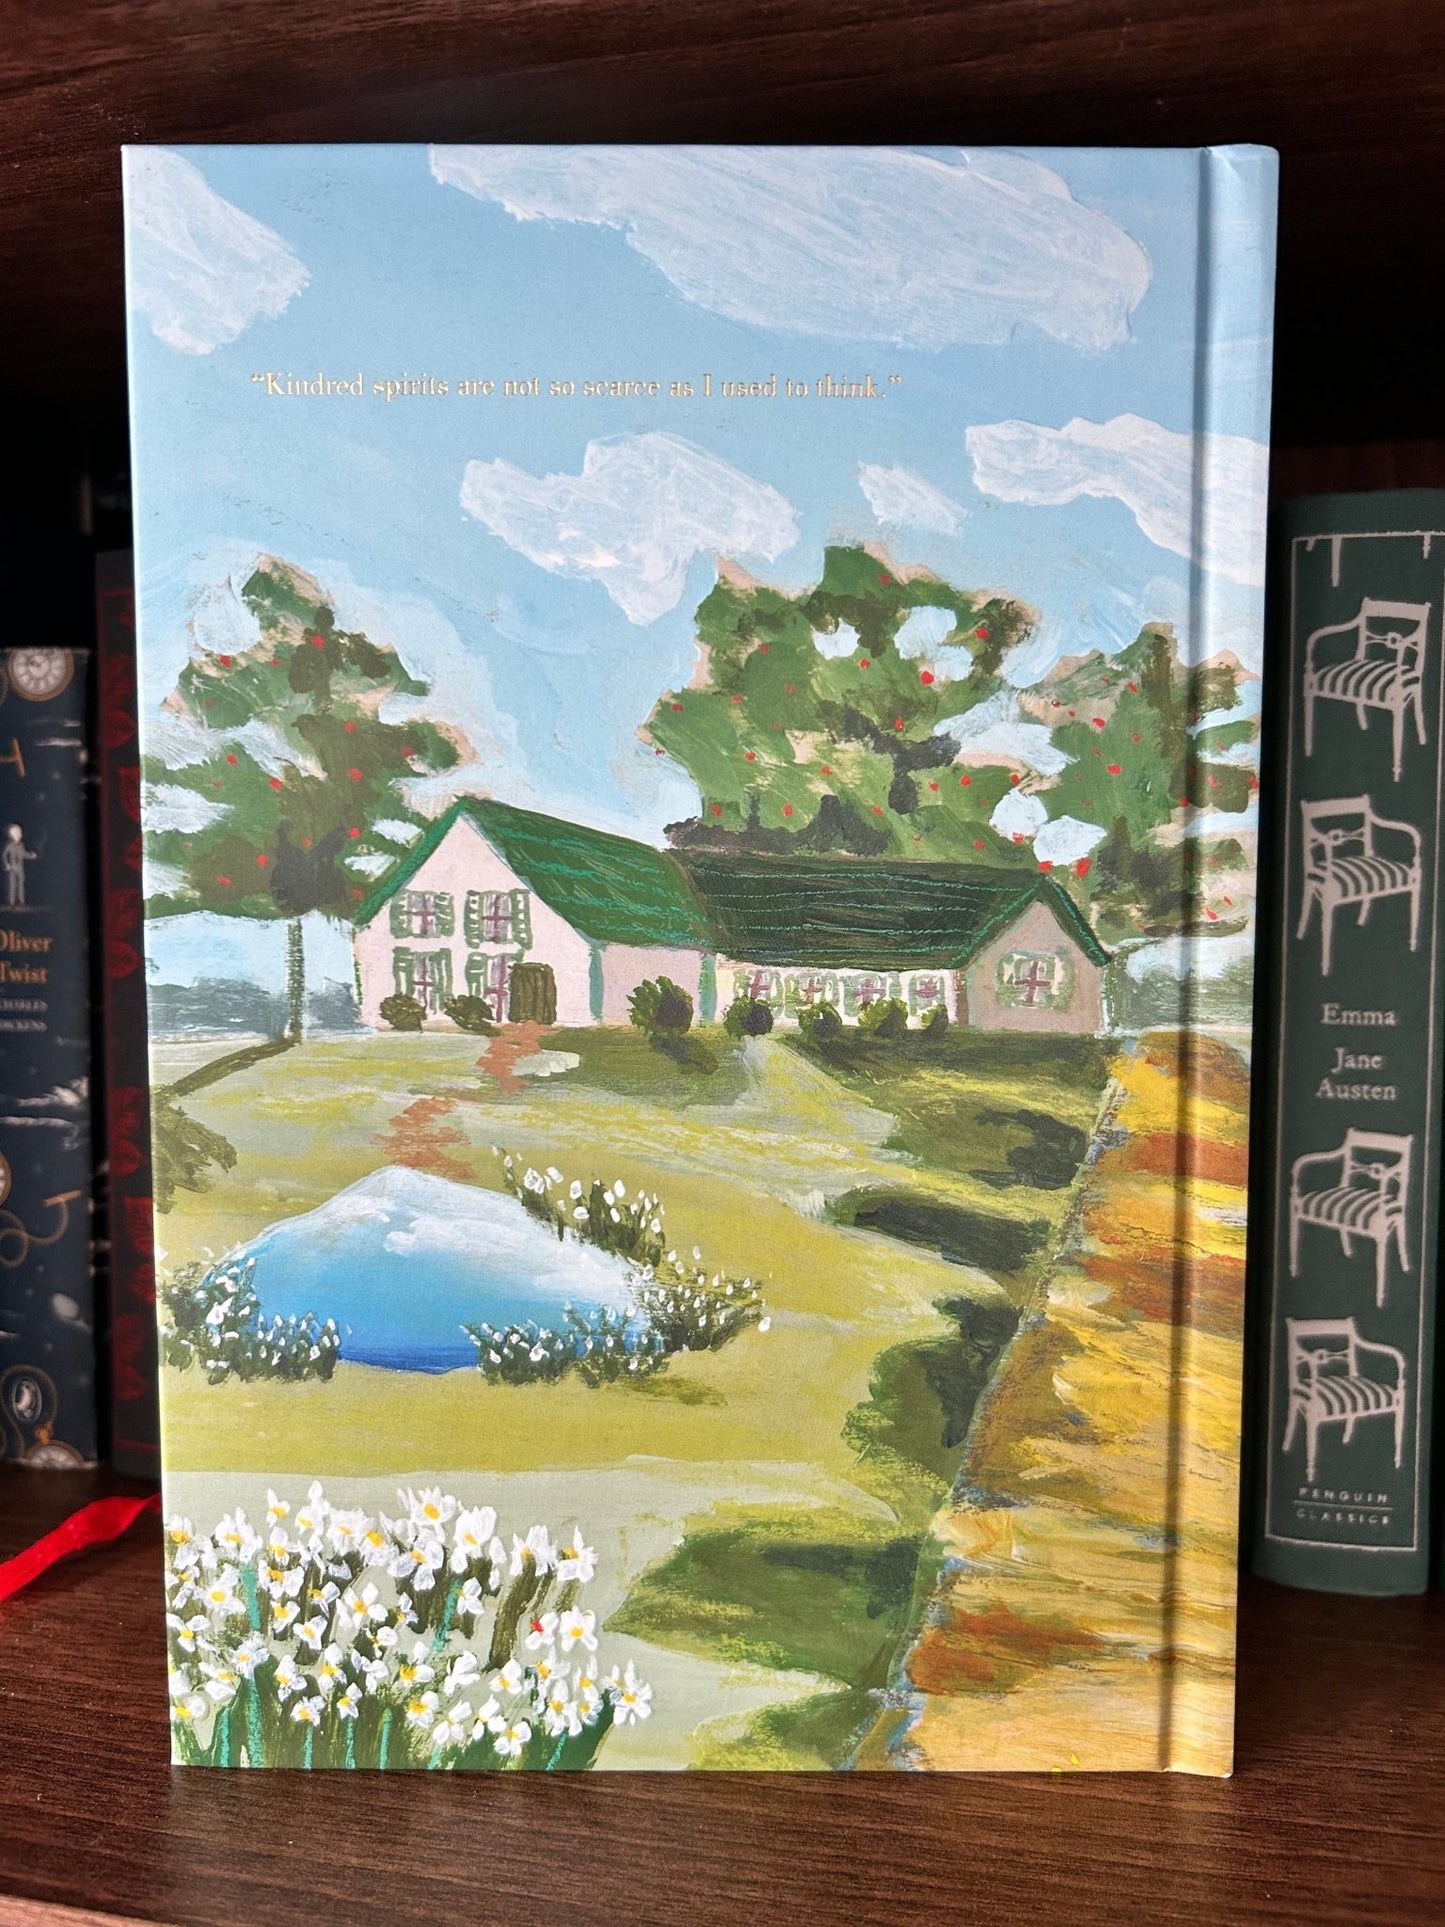 Anne of Green Gables by L.M Montgomery - Harper Muse Painted Edition - Looking Glass Books -